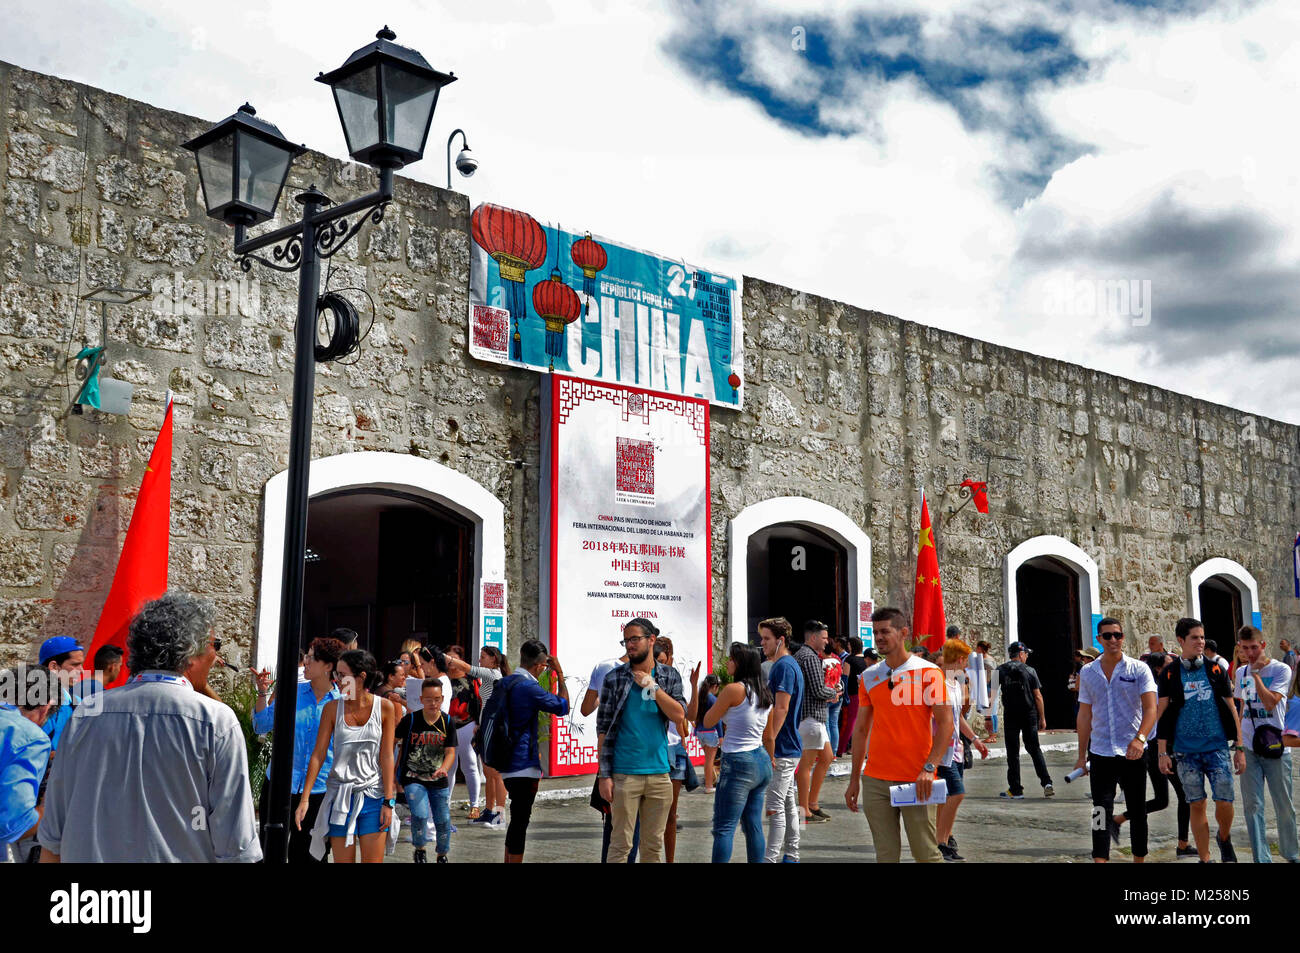 Havana. 3rd Feb, 2018. Photo taken on Feb. 3, 2018 shows people visiting Havana's International Book Fair in Havana, Cuba. An incessant flow of people entering and leaving the main pavilion at Havana's International Book Fair clearly indicates the people's strong interest in this year's featured guest country: China. Cuba's International Book Fair 2018 opened here on Feb. 1 amid drumroll with China as this year's guest country. Credit: Joaquin Hernandez/Xinhua/Alamy Live News Stock Photo